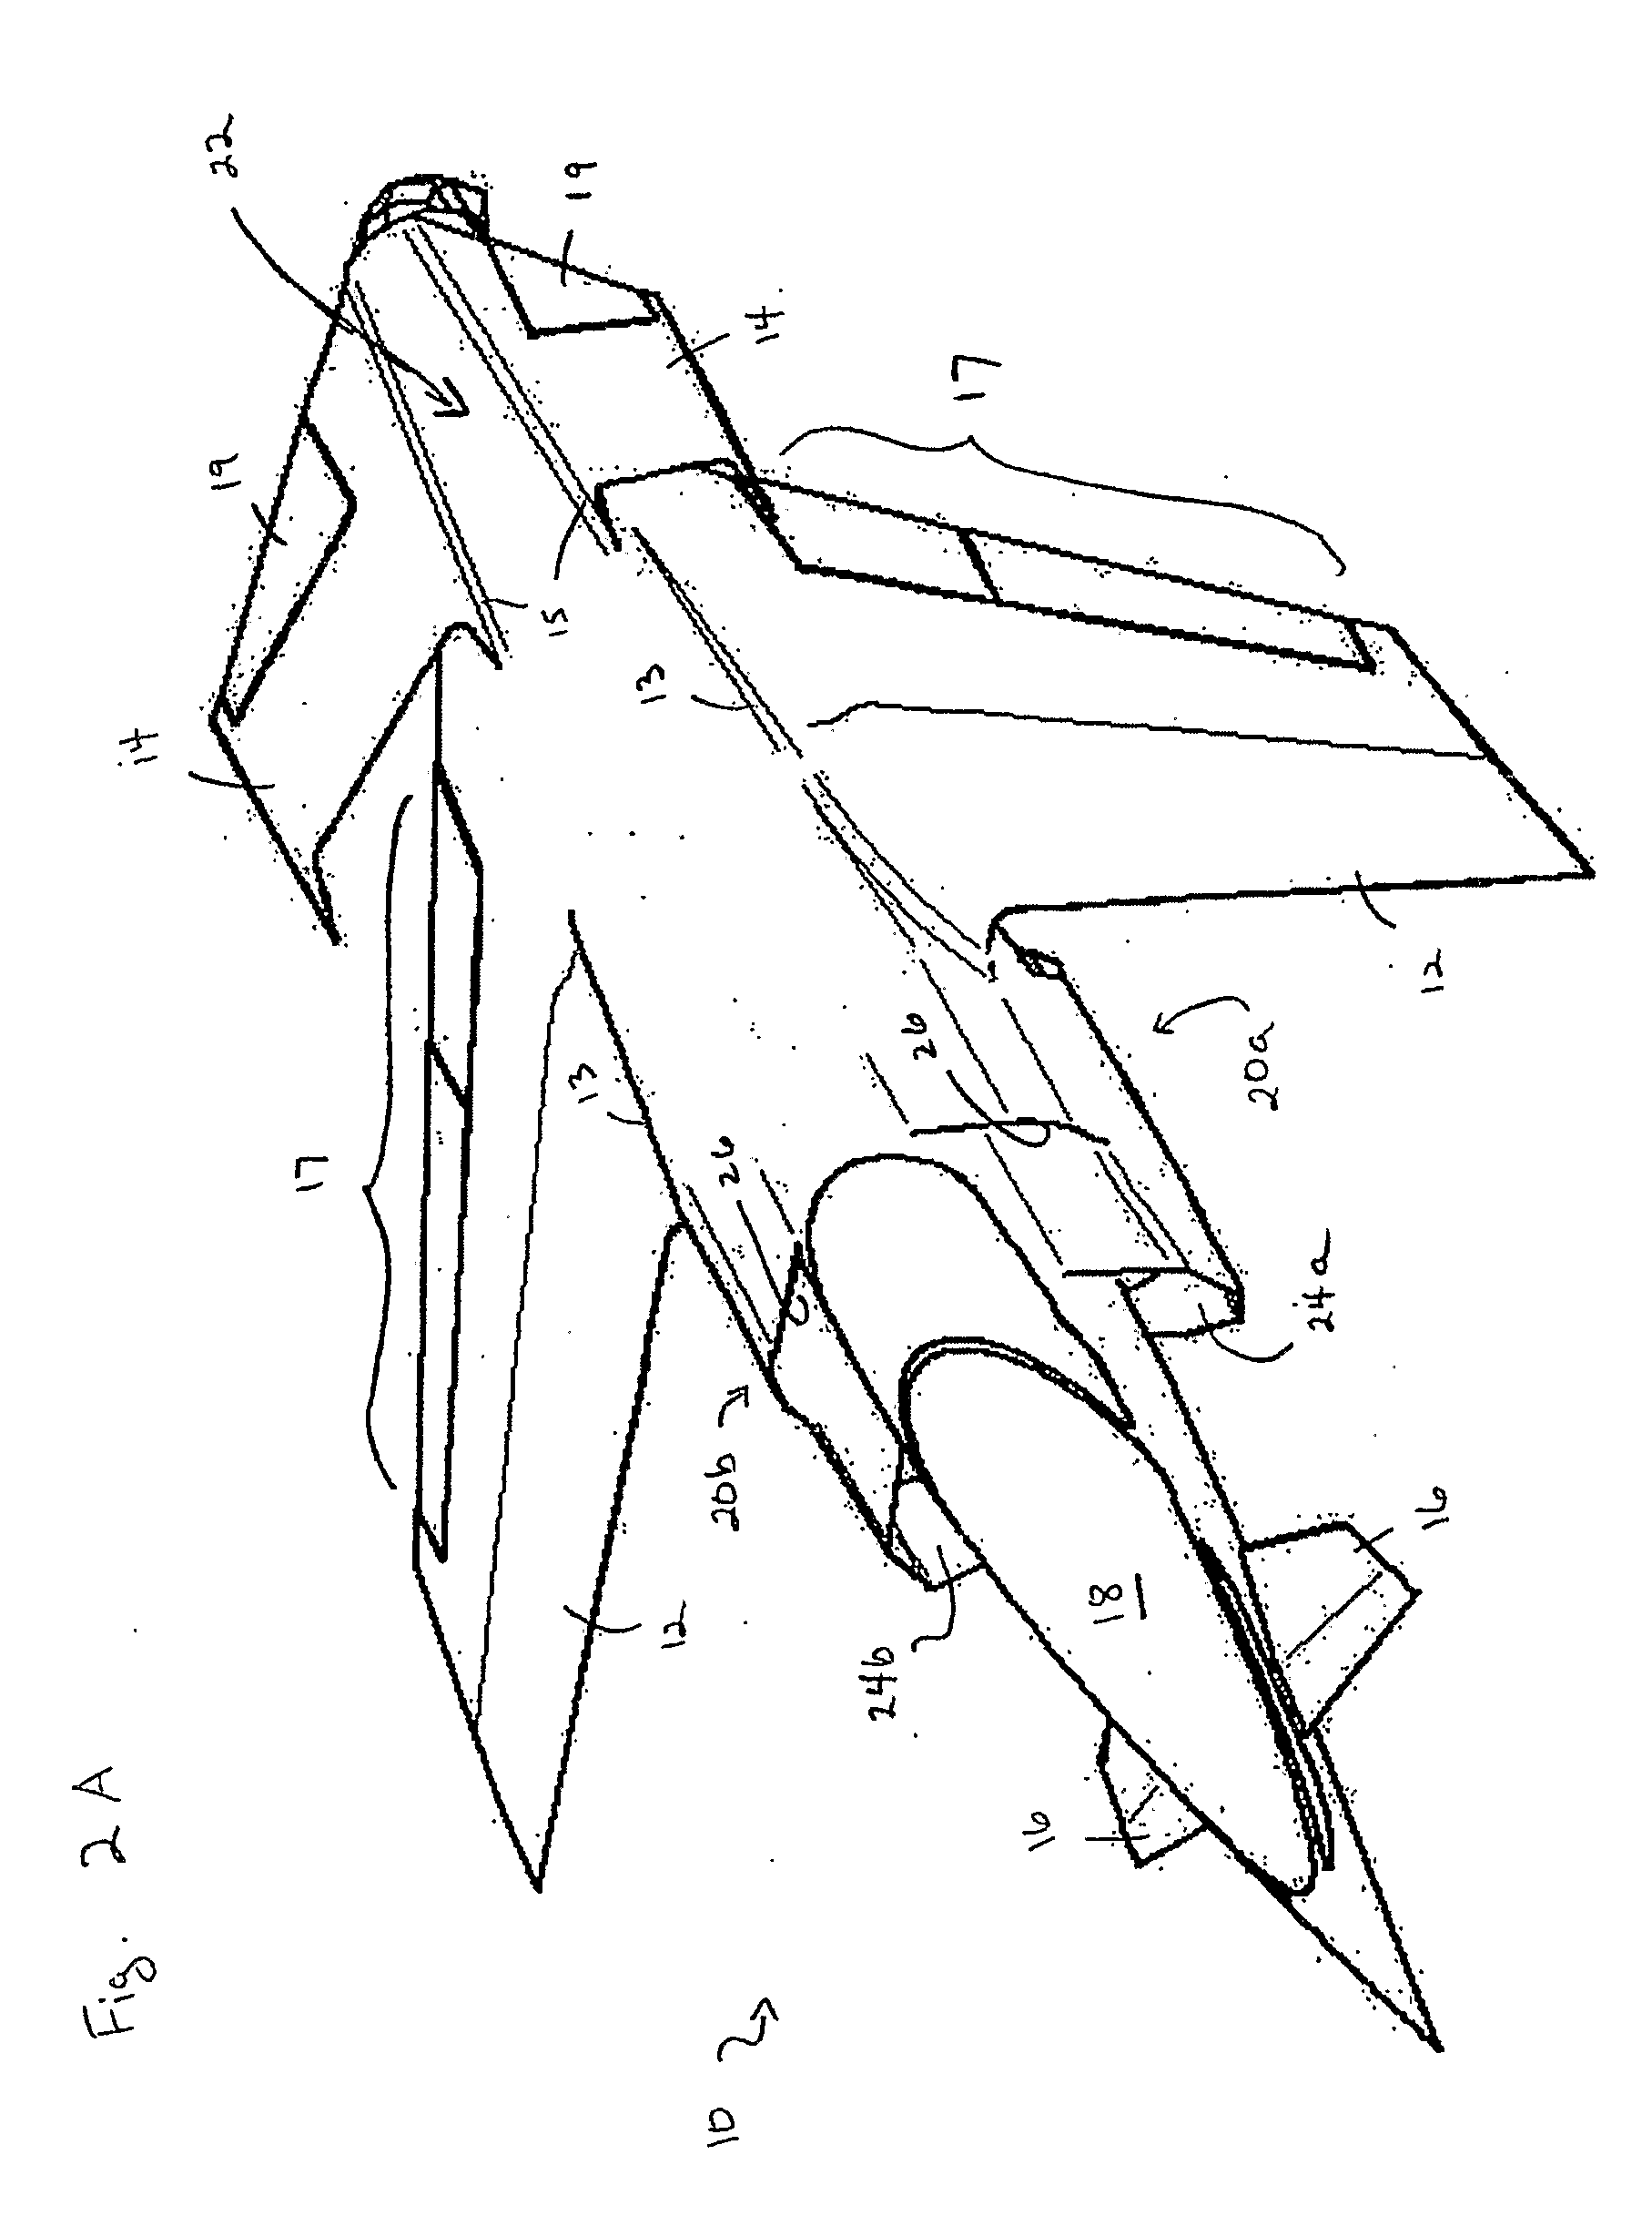 Vtol aircraft with forward-swept fixed wing